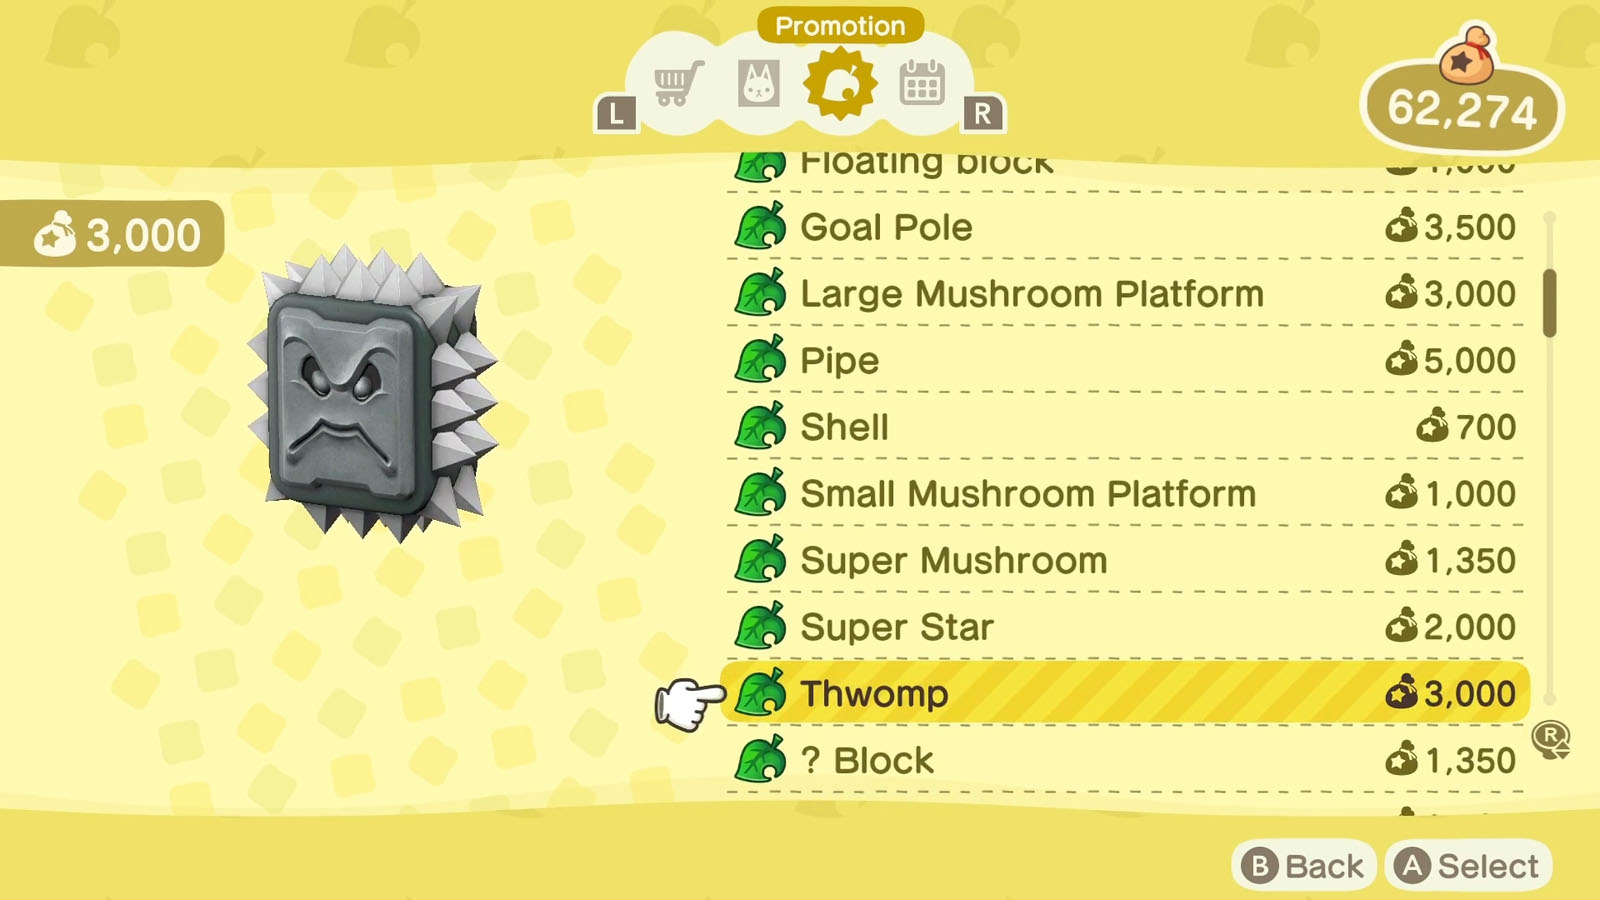 Super Mario Animal Crossing Update Items Complete List (Picture Guide)